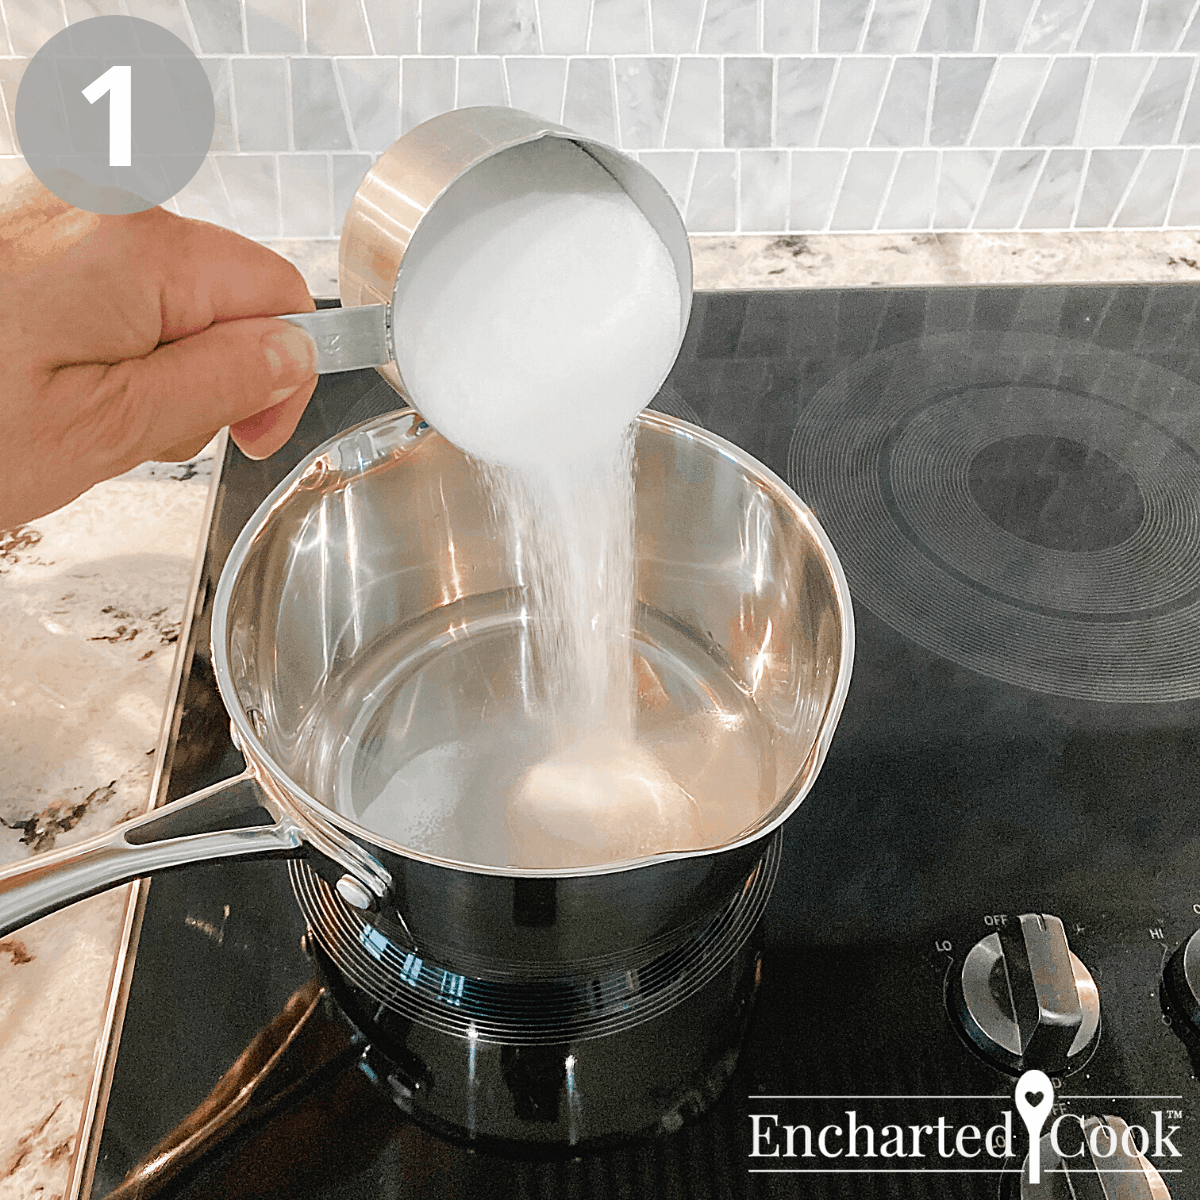 In a small saucepan white granulated sugar is added to water.